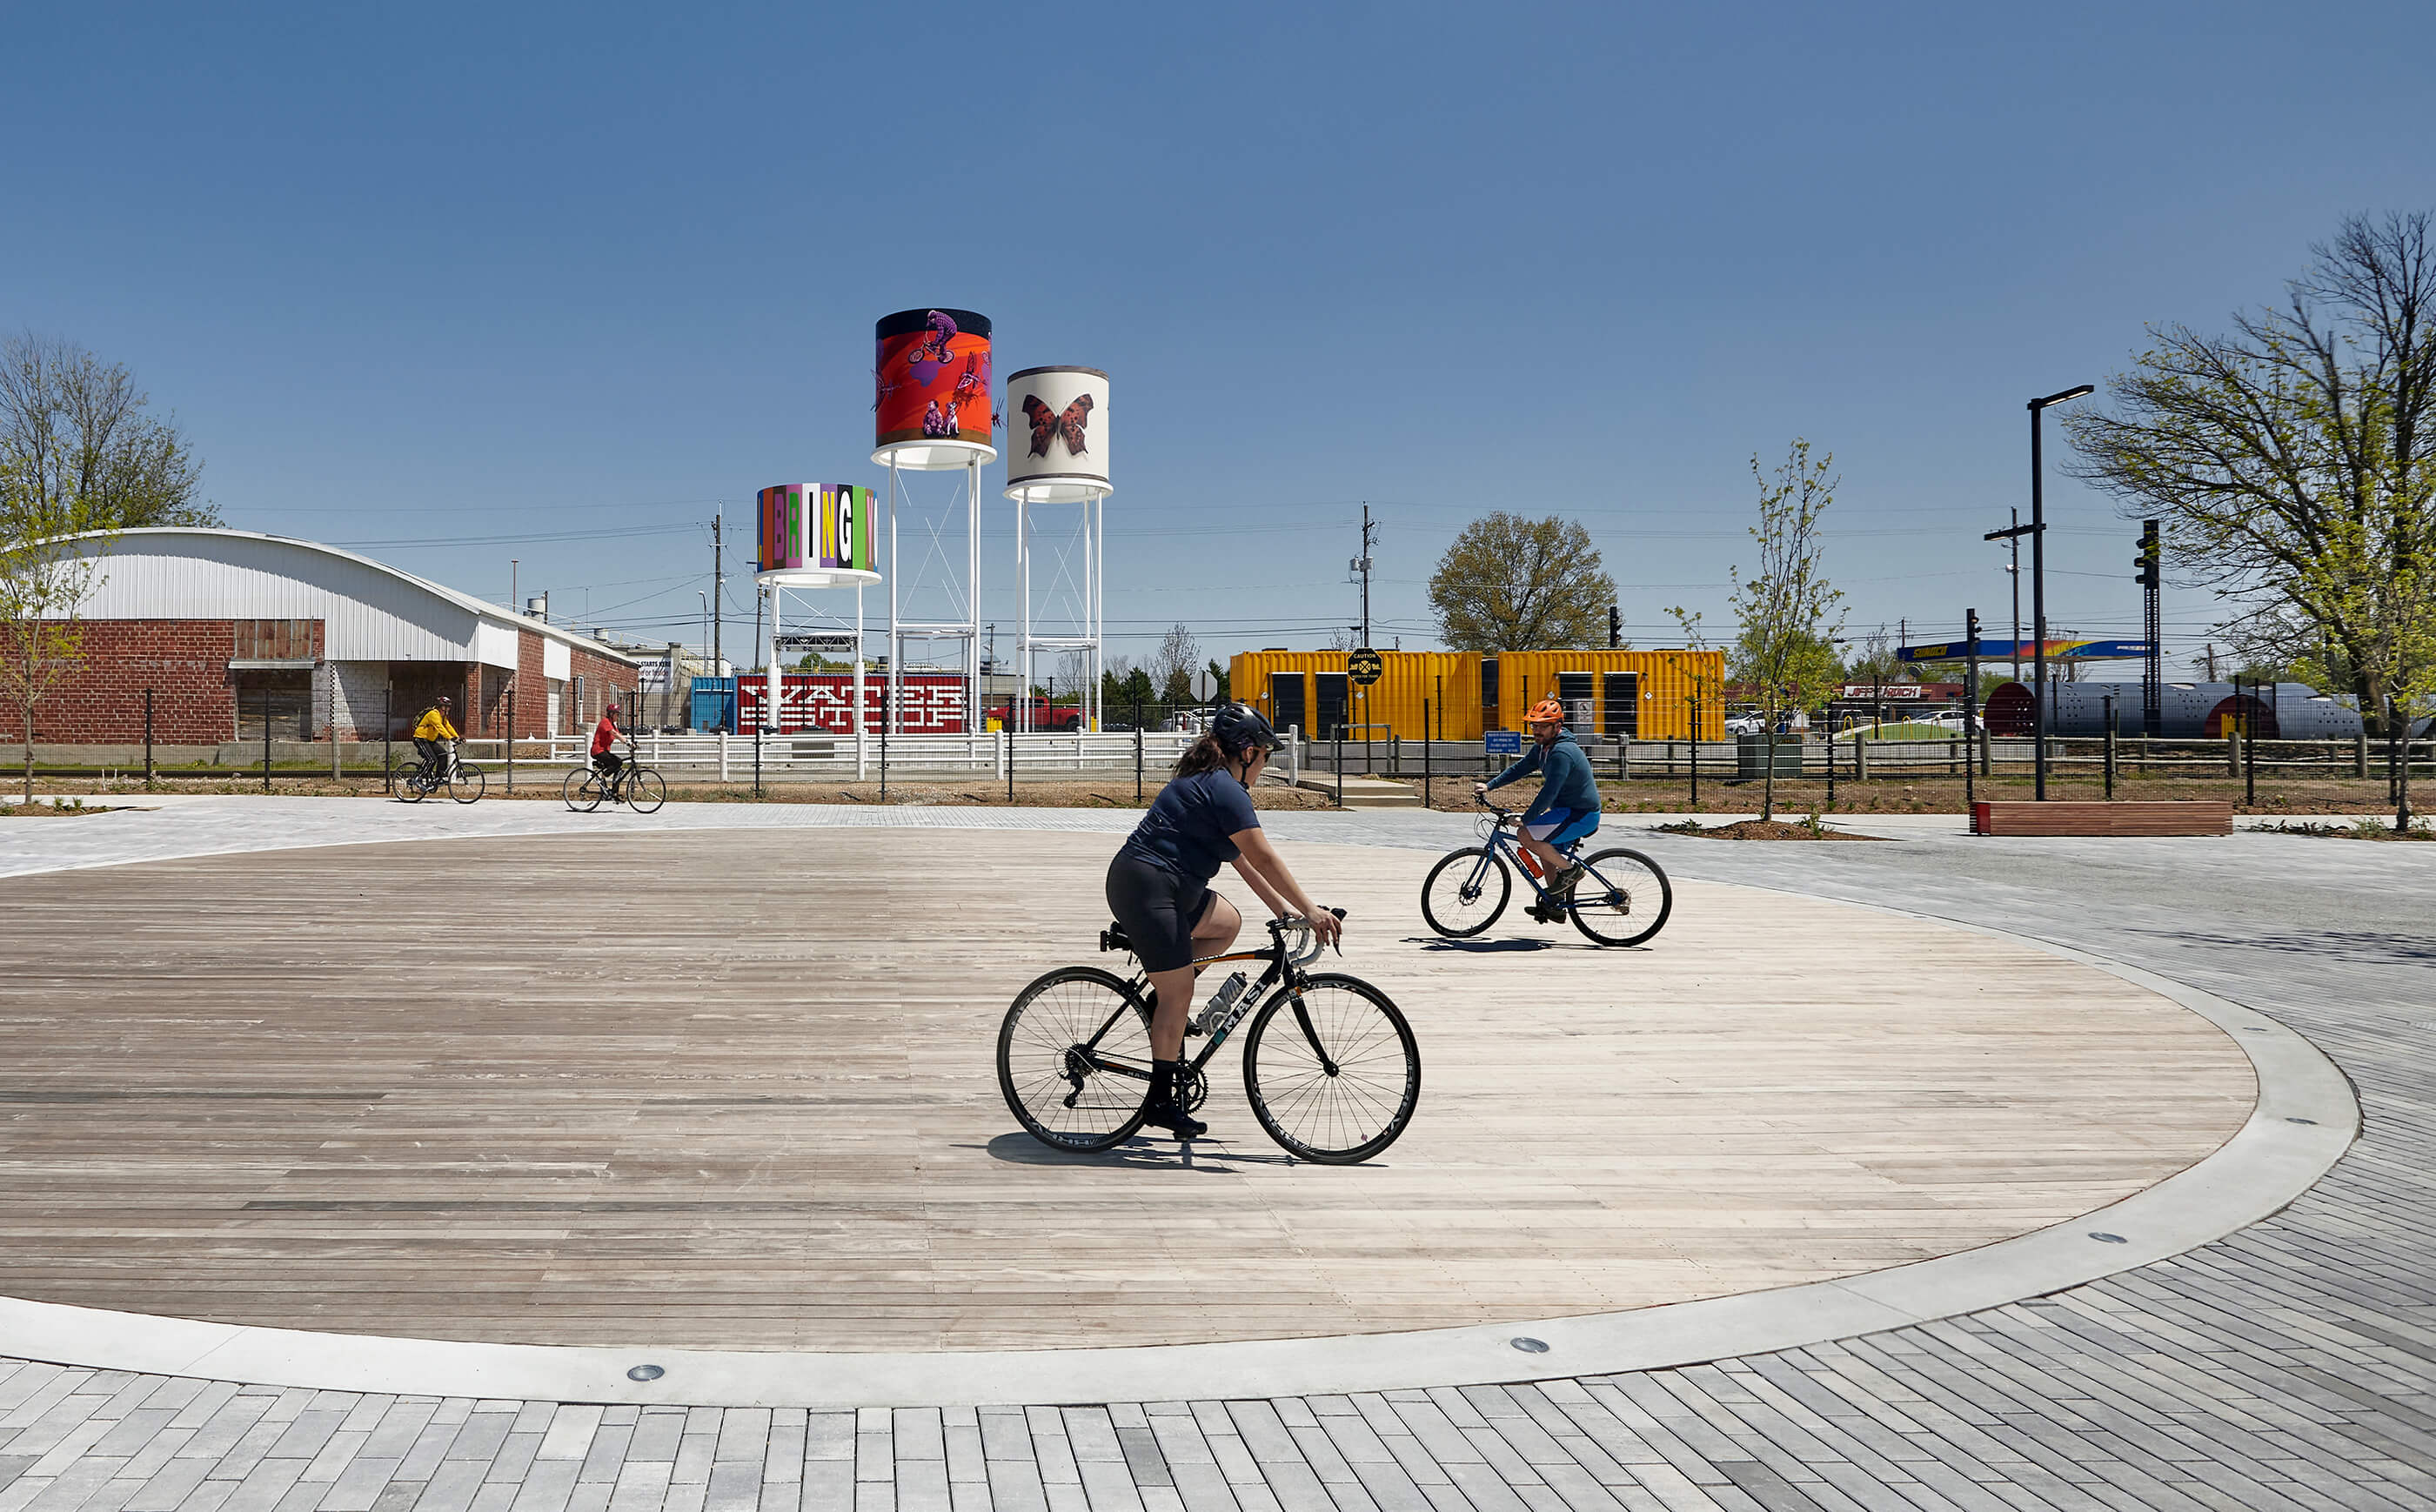 People riding bikes around on a wooden surface